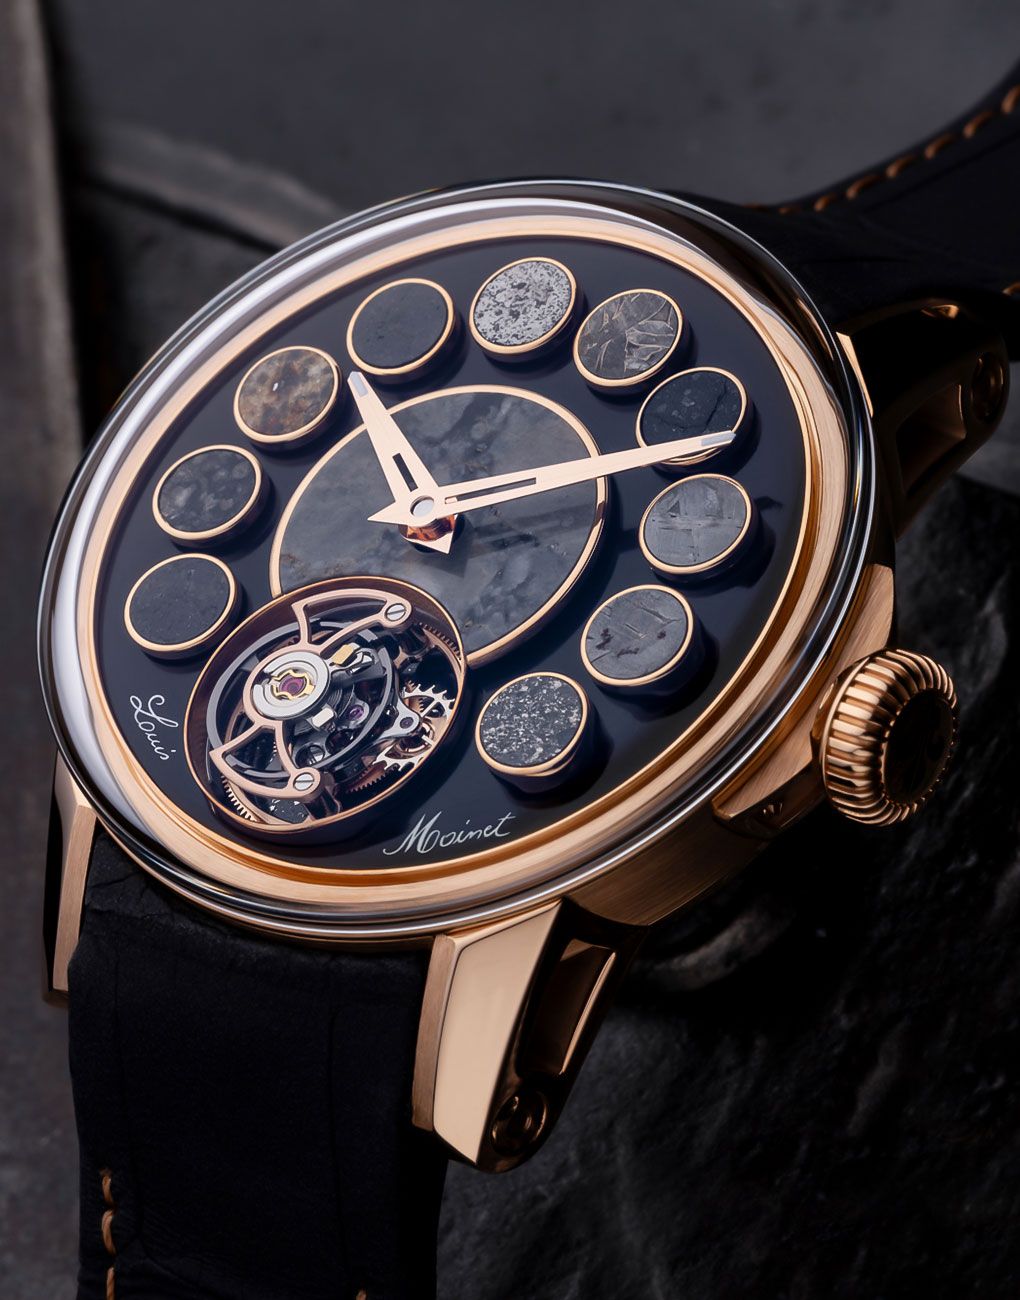 First Look: Louis Moinet Cosmopolis And Its Dial With 12 Meteorites